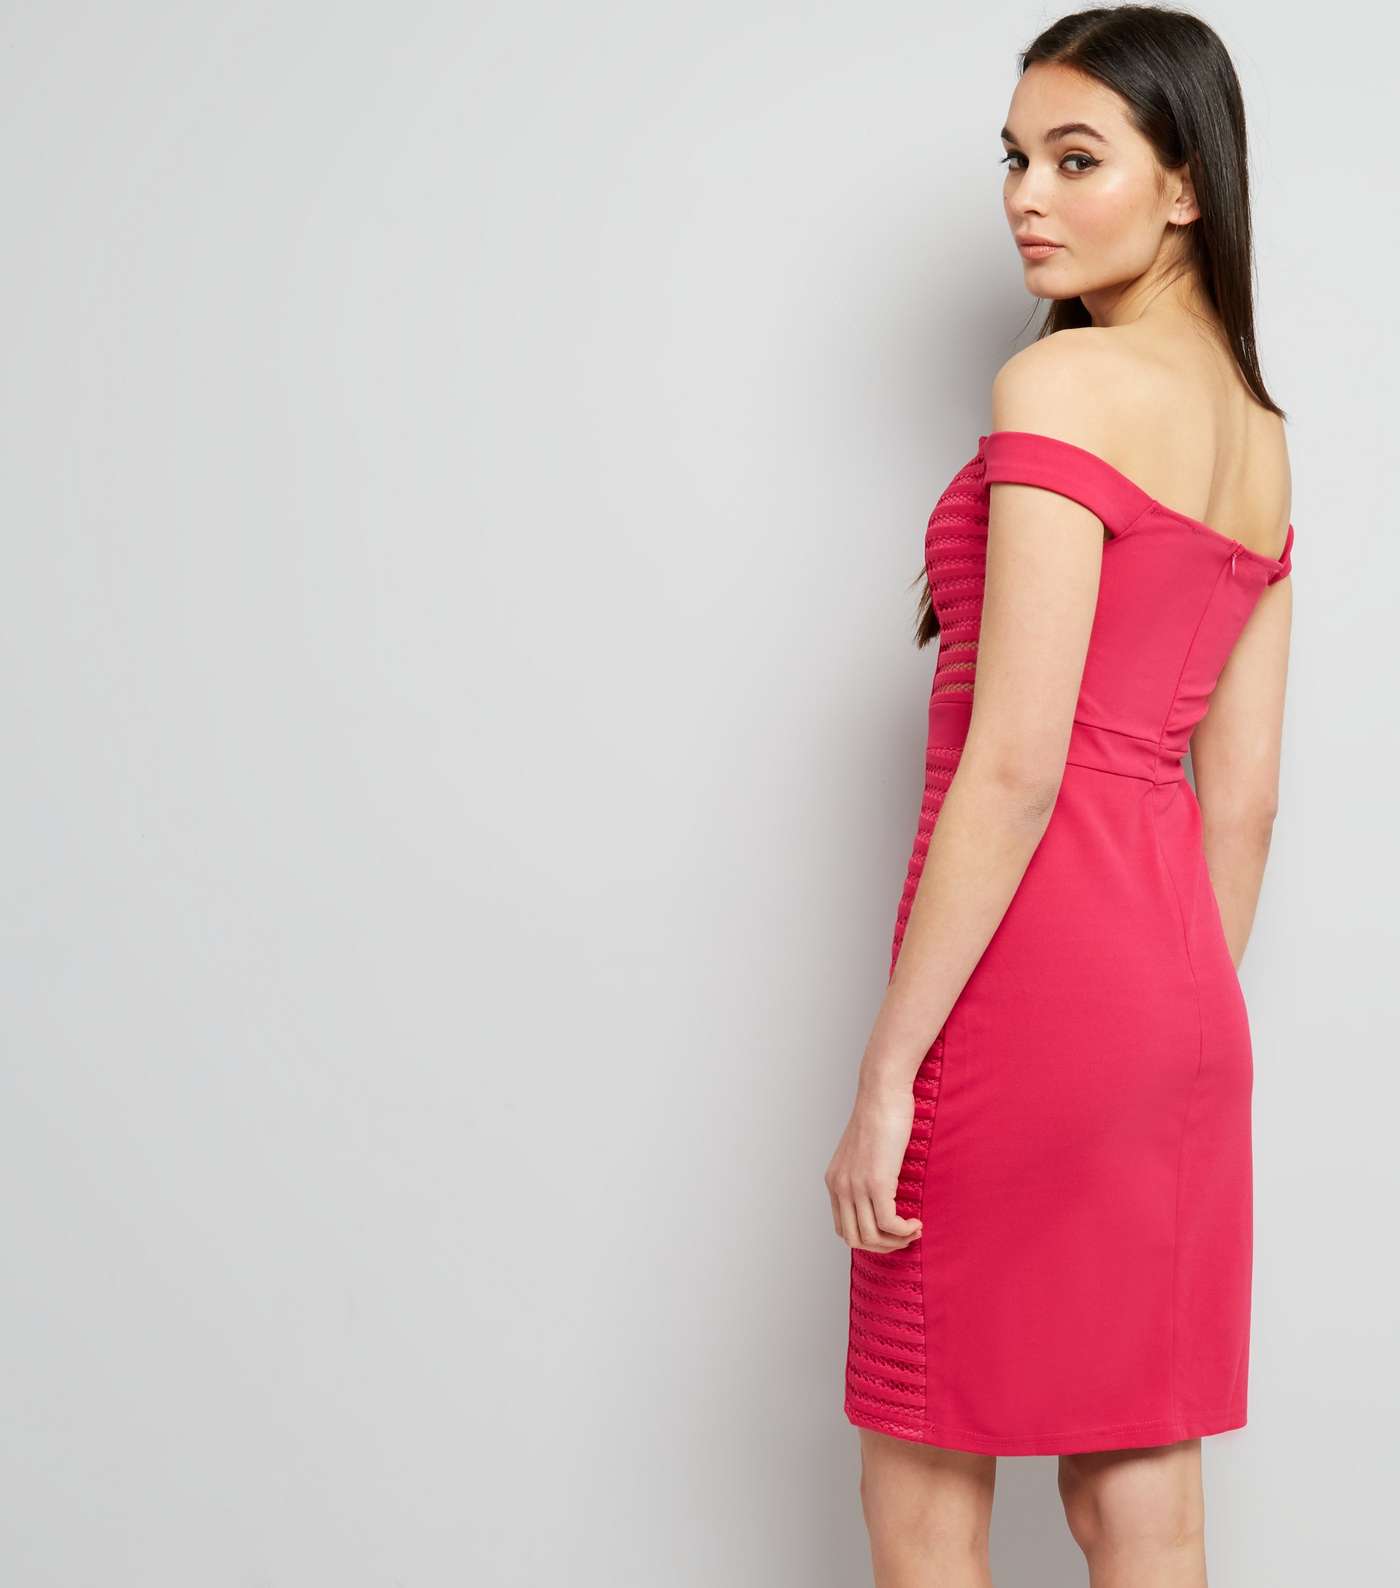 Parisian Bright Pink Cut Out Sides Bodycon Dress  Image 3